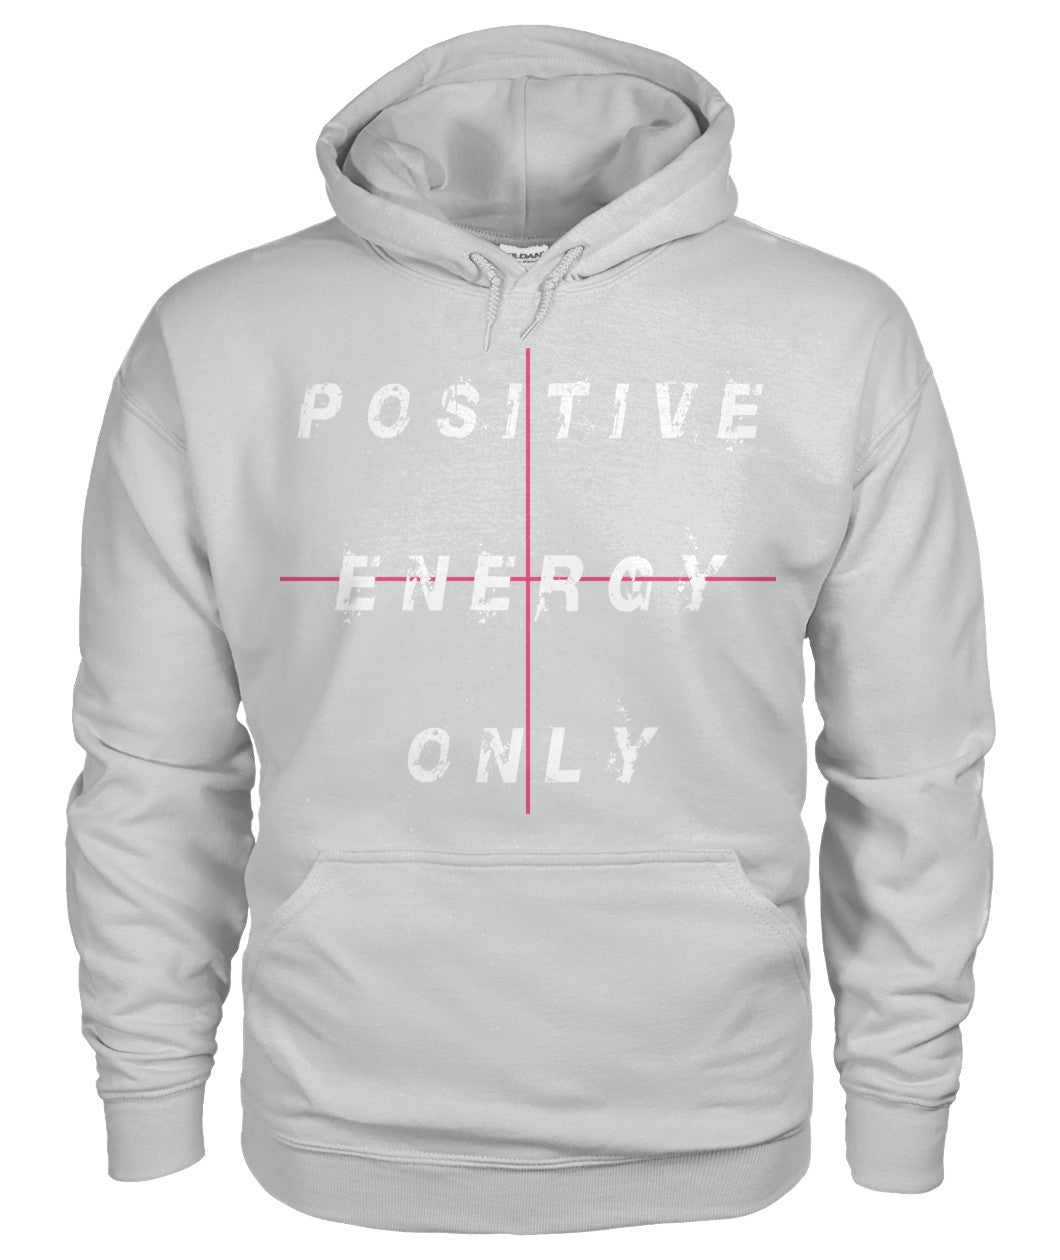 Positive Energy Only (Hoodies)